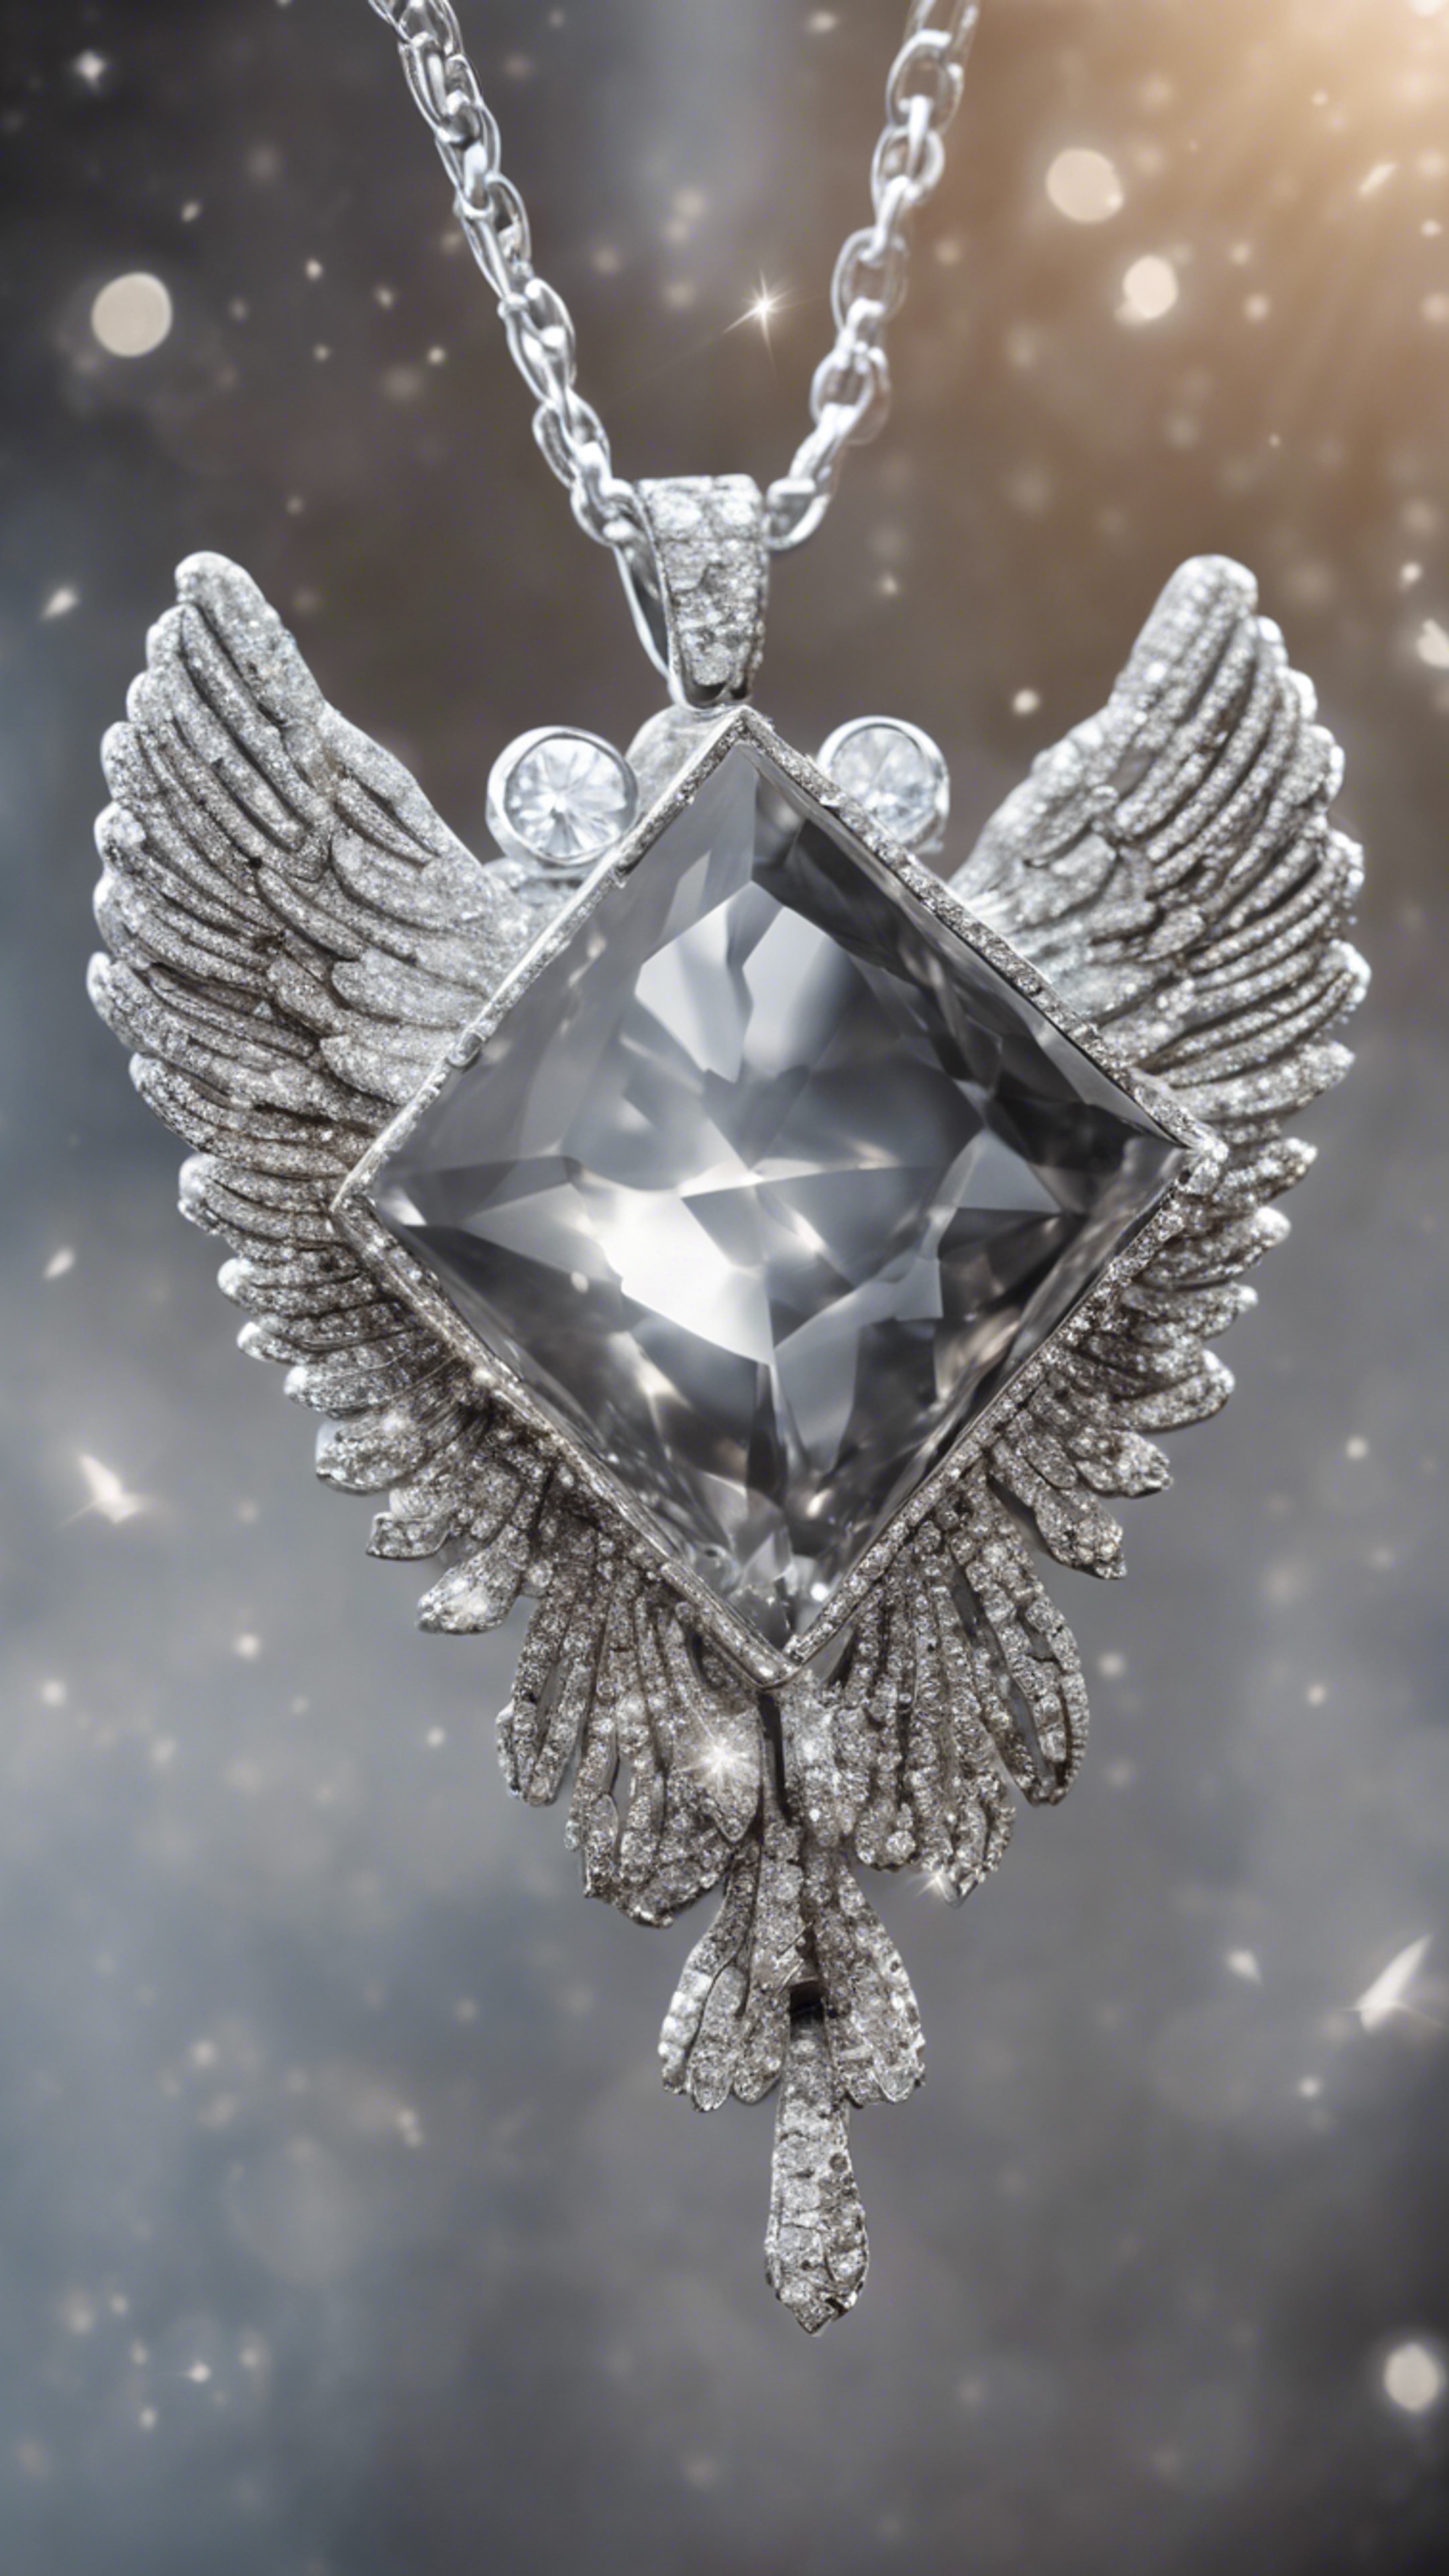 A gray diamond wrapped in the wings of a silver angel pendant. 牆紙[ad1b9e387c144e34b8b5]